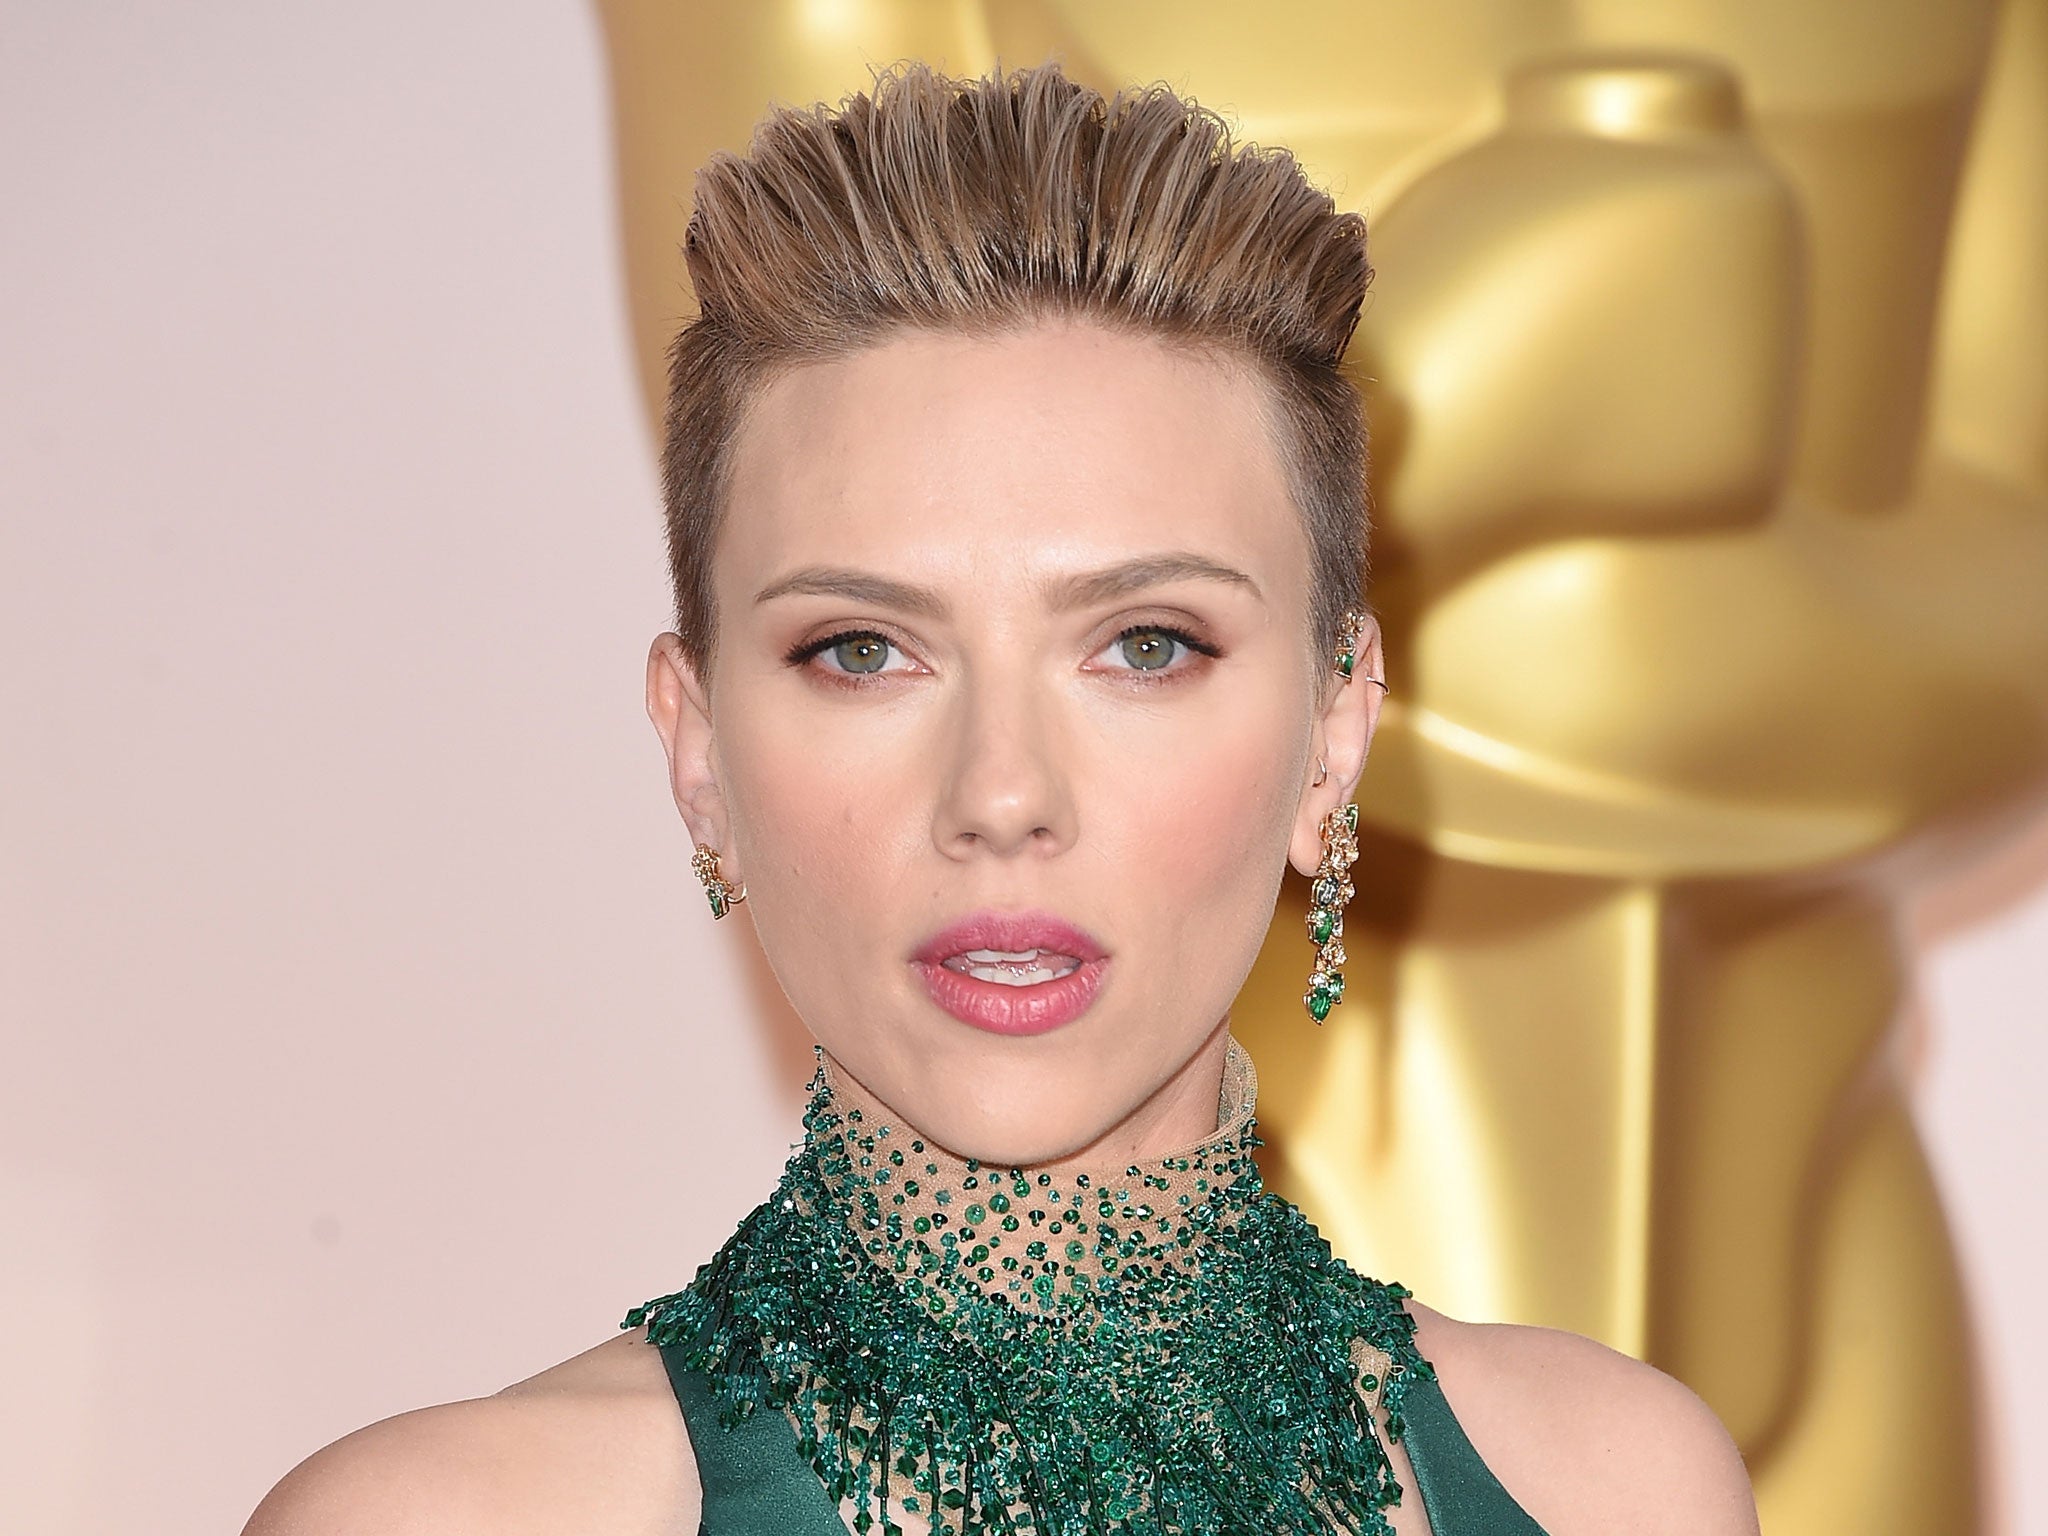 Scarlett Johansson has formed an all-female band called The Singles